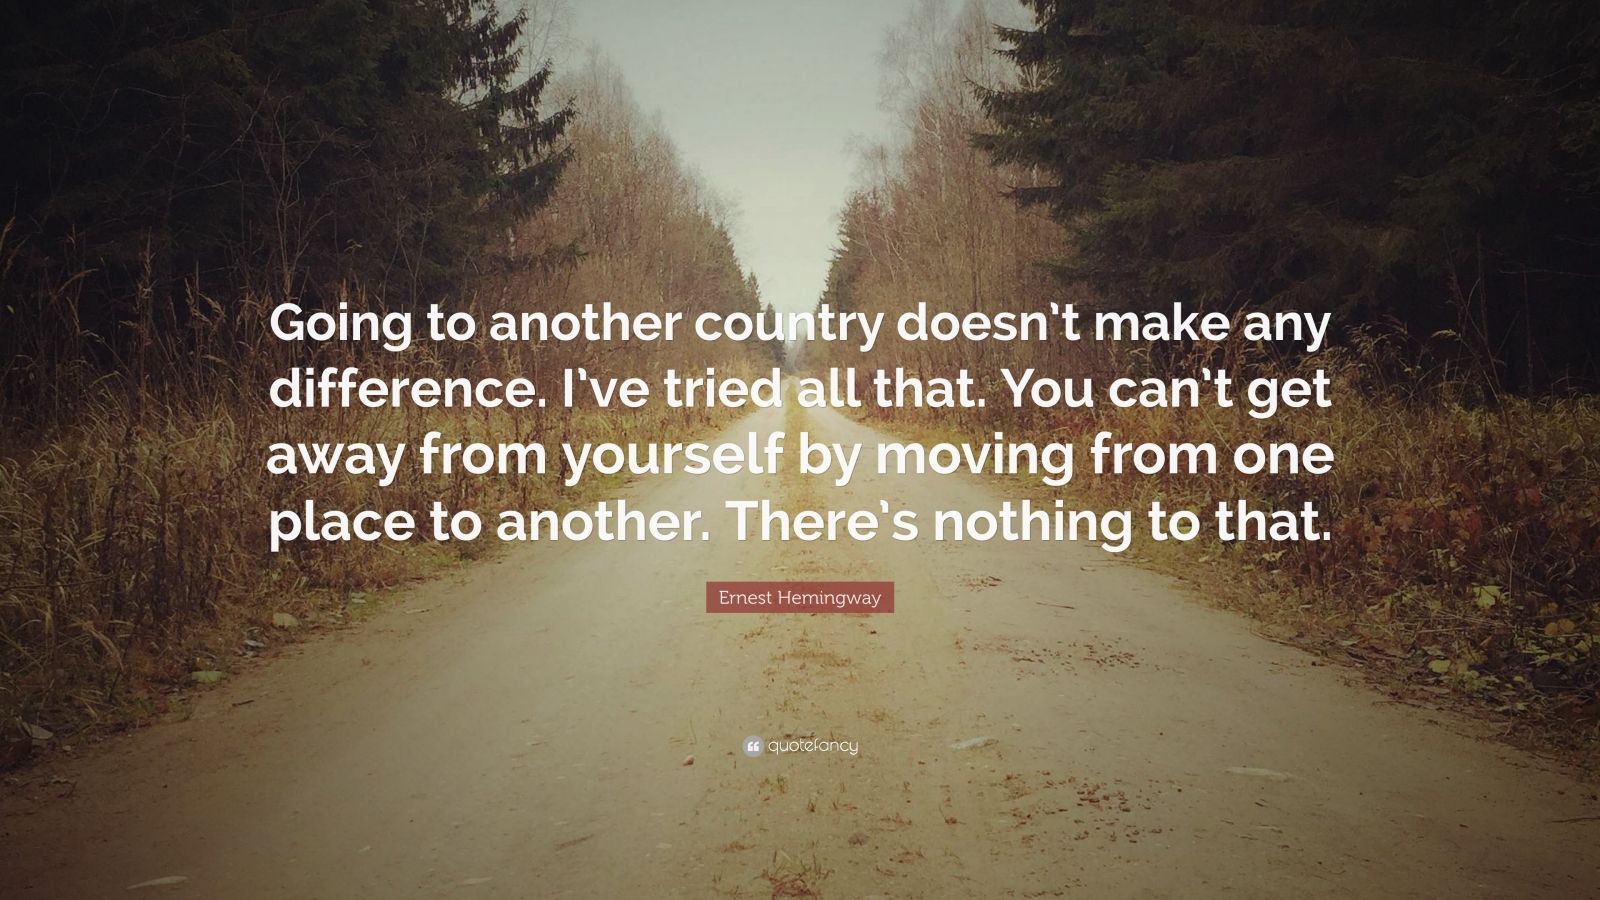 Ernest Hemingway Quote: “Going to another country doesn’t make any ...